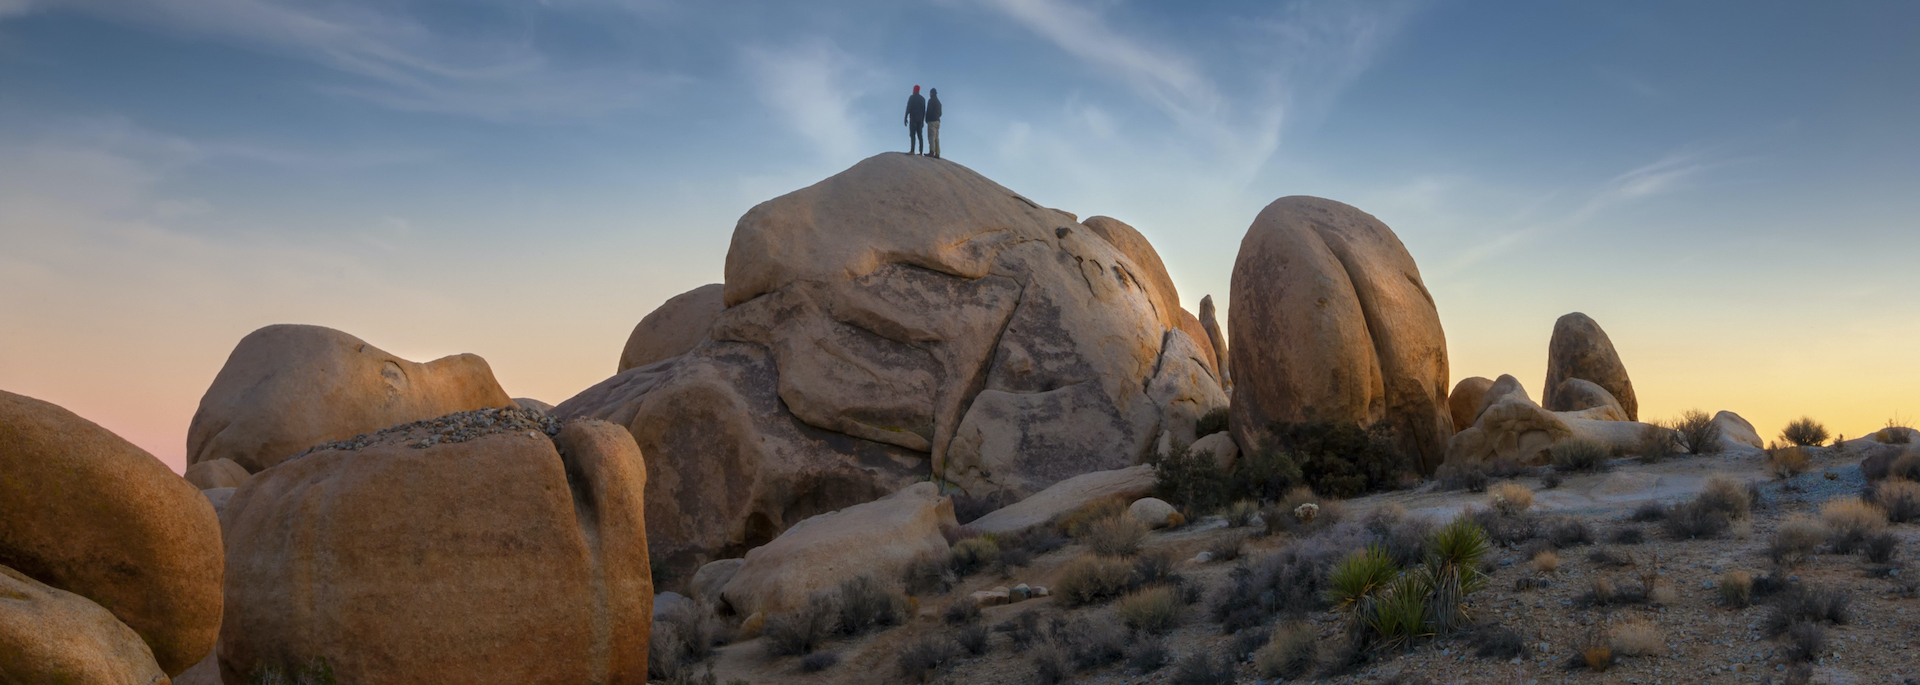 two people standing on top of a rock in the desert